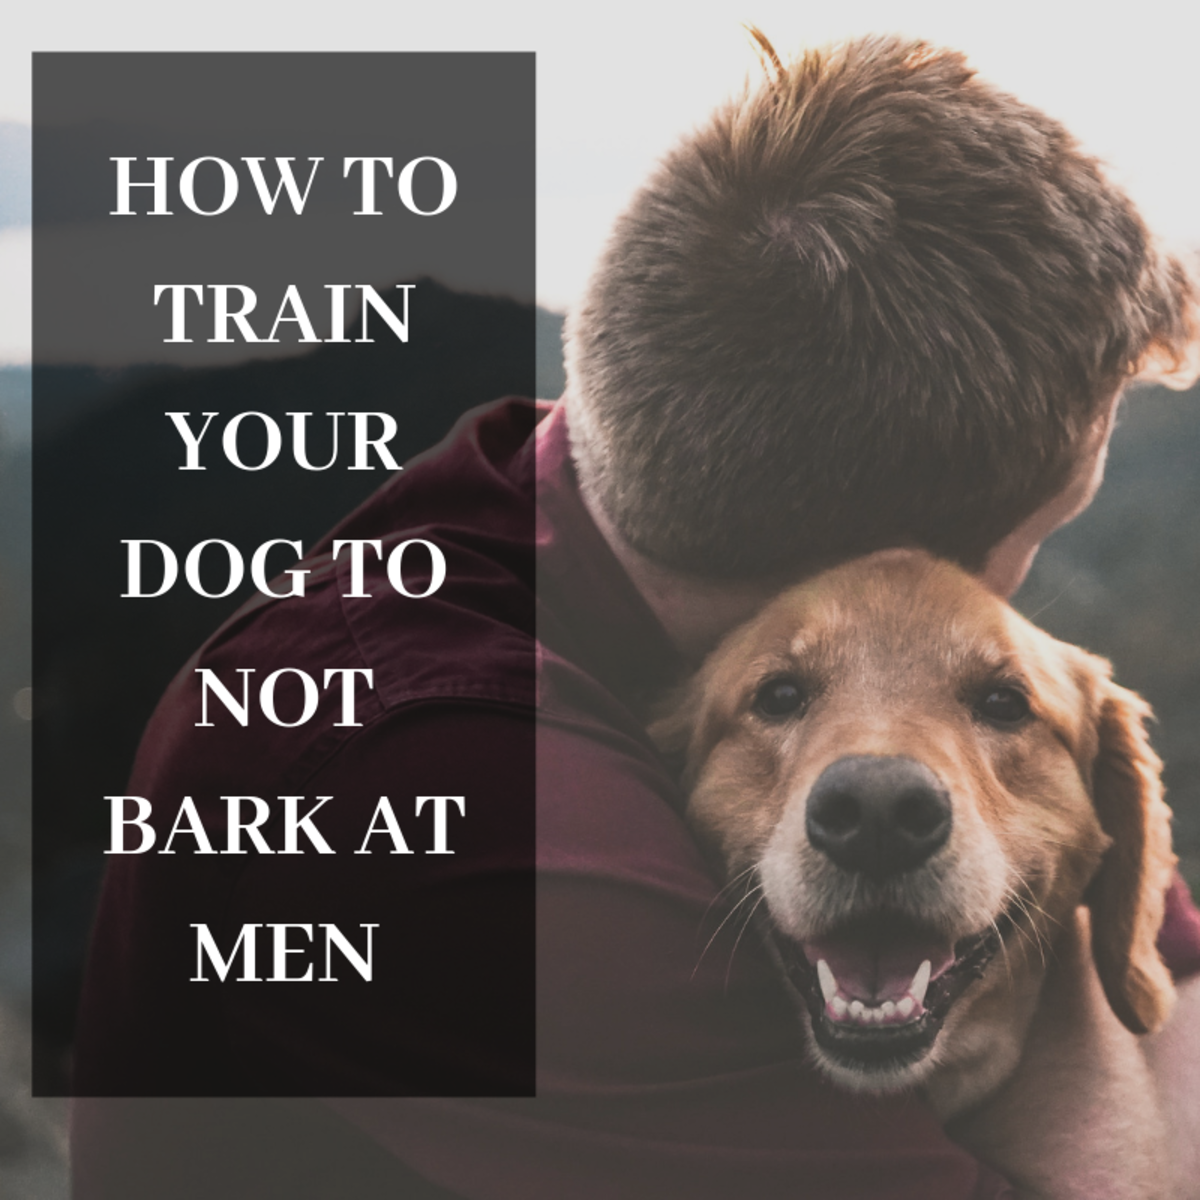 How to change your dog's attitude towards men.